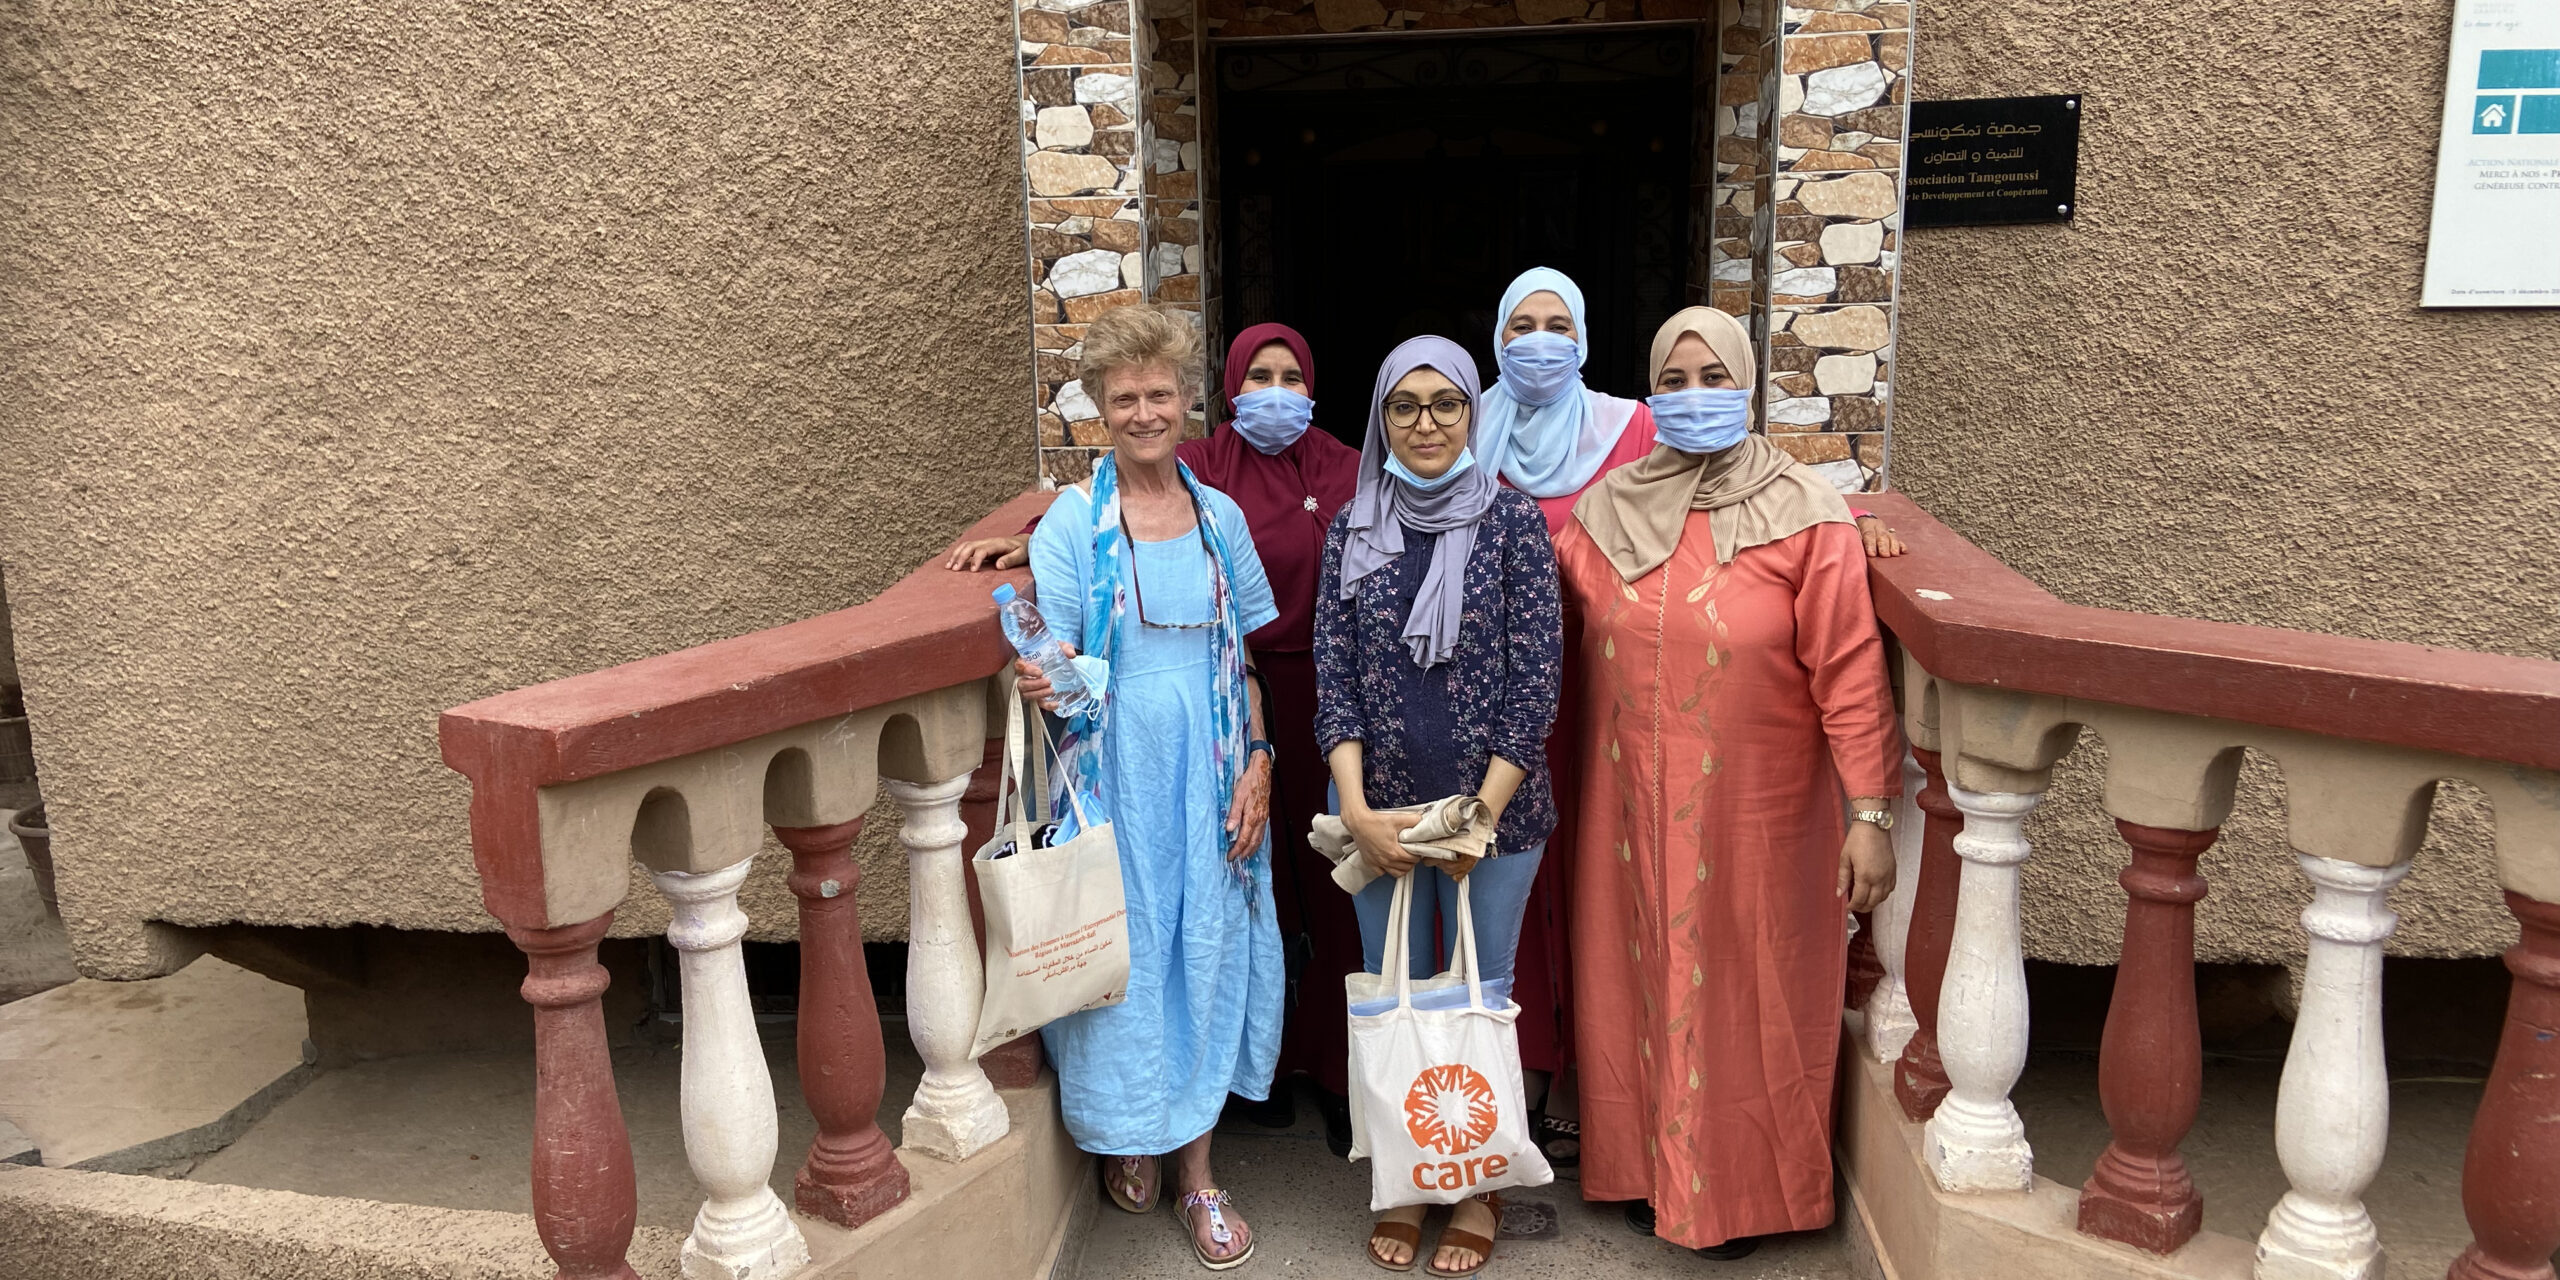 A group of five women stand in an outside doorway. They are grouped together for the photo.